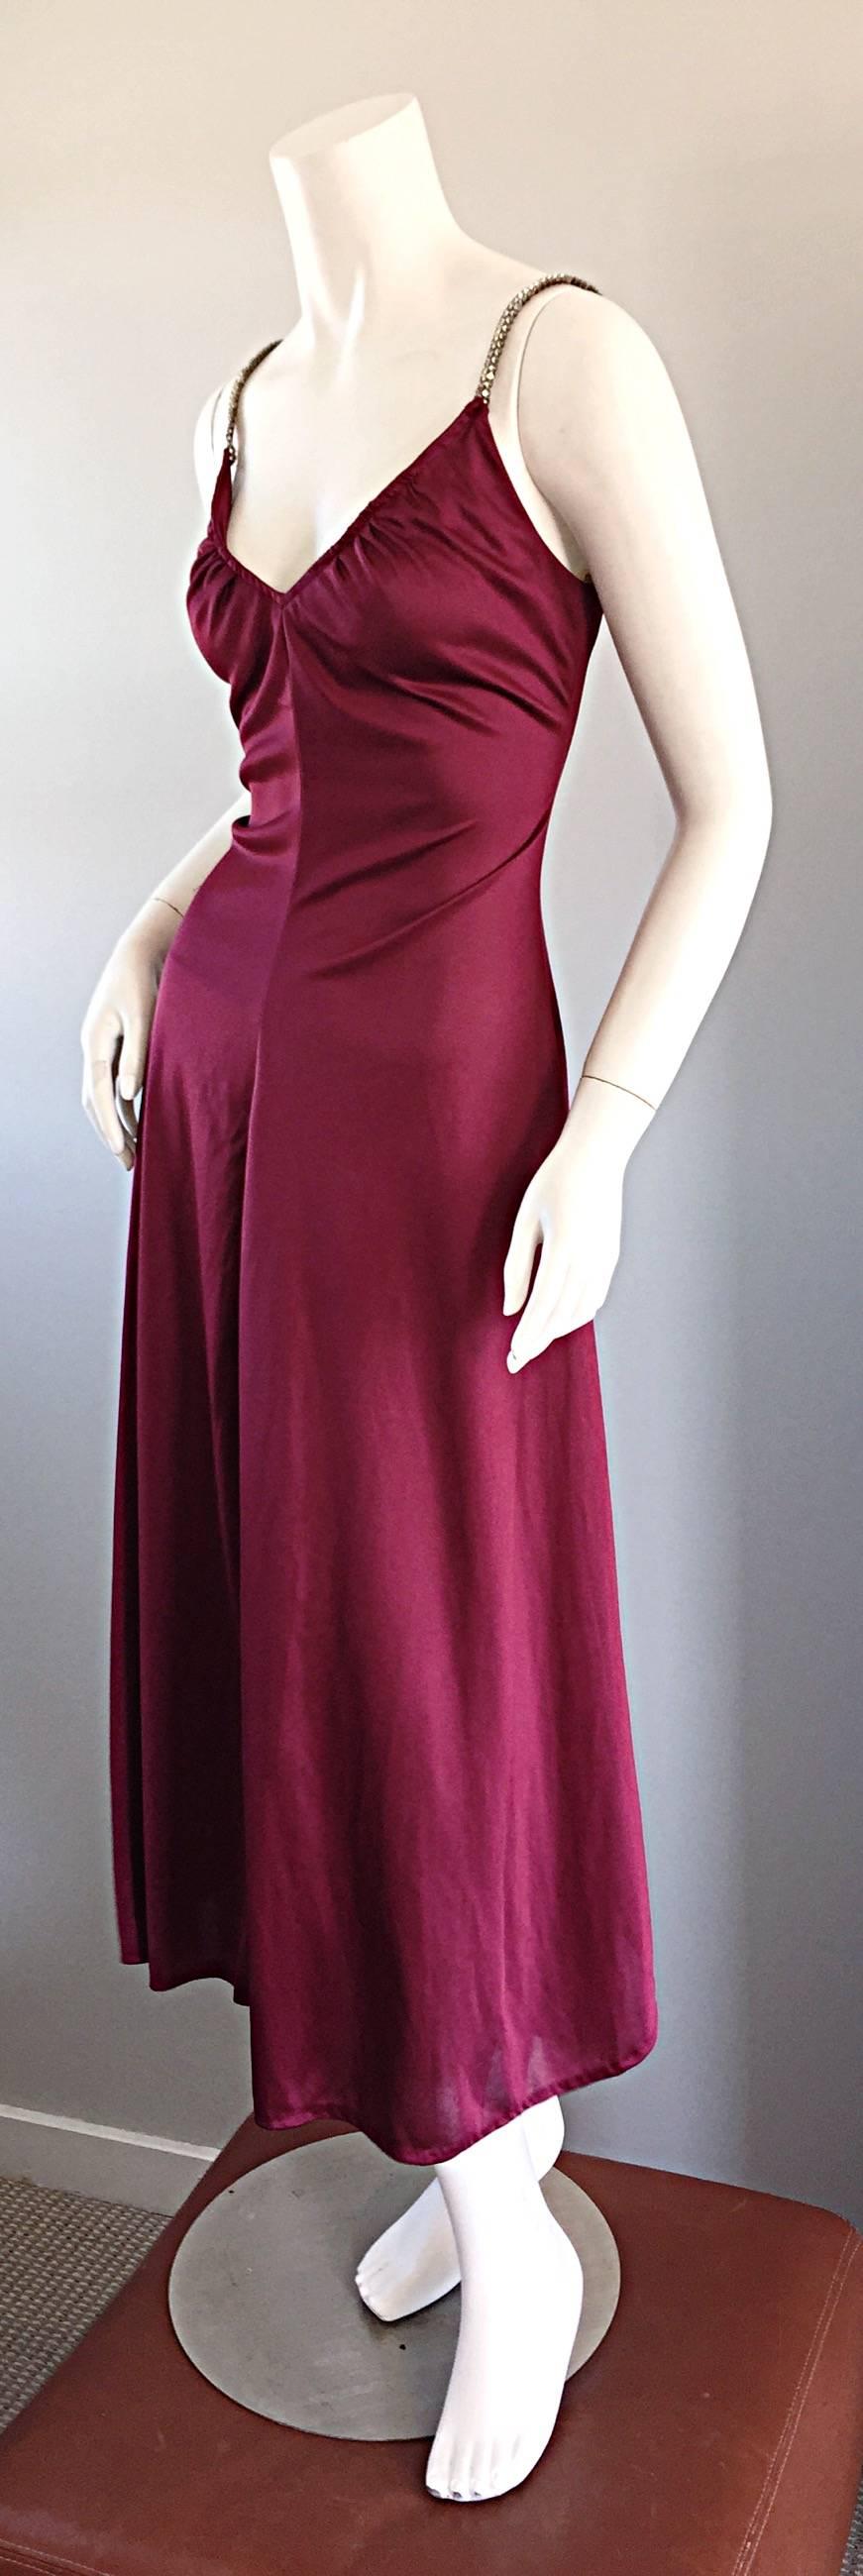 Sexy 1970s Joseph Magnin disco dress!!!! Rich burgundy wine color, with rhinestones encrusted on straps. Ruched bodice, that is so flattering on! Slinky skirt,with slit up the side. Looks great alone, or belted. Perfect with sandals, wedges, boots,